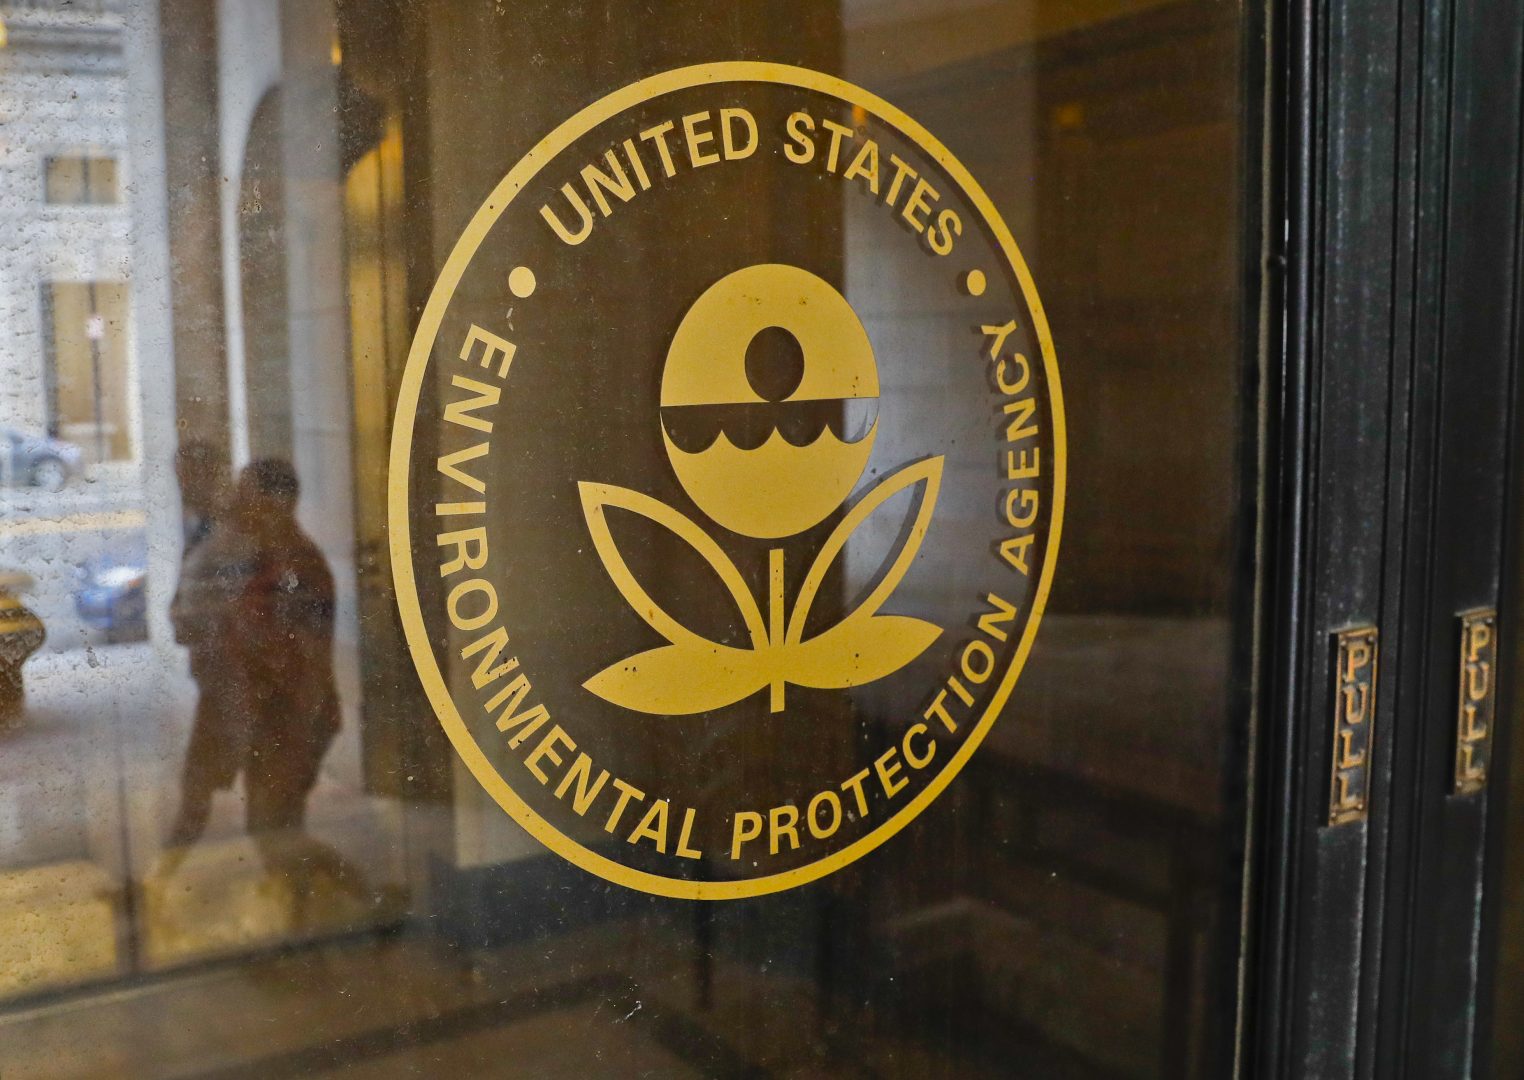 File photo: The Environmental Protection Agency.